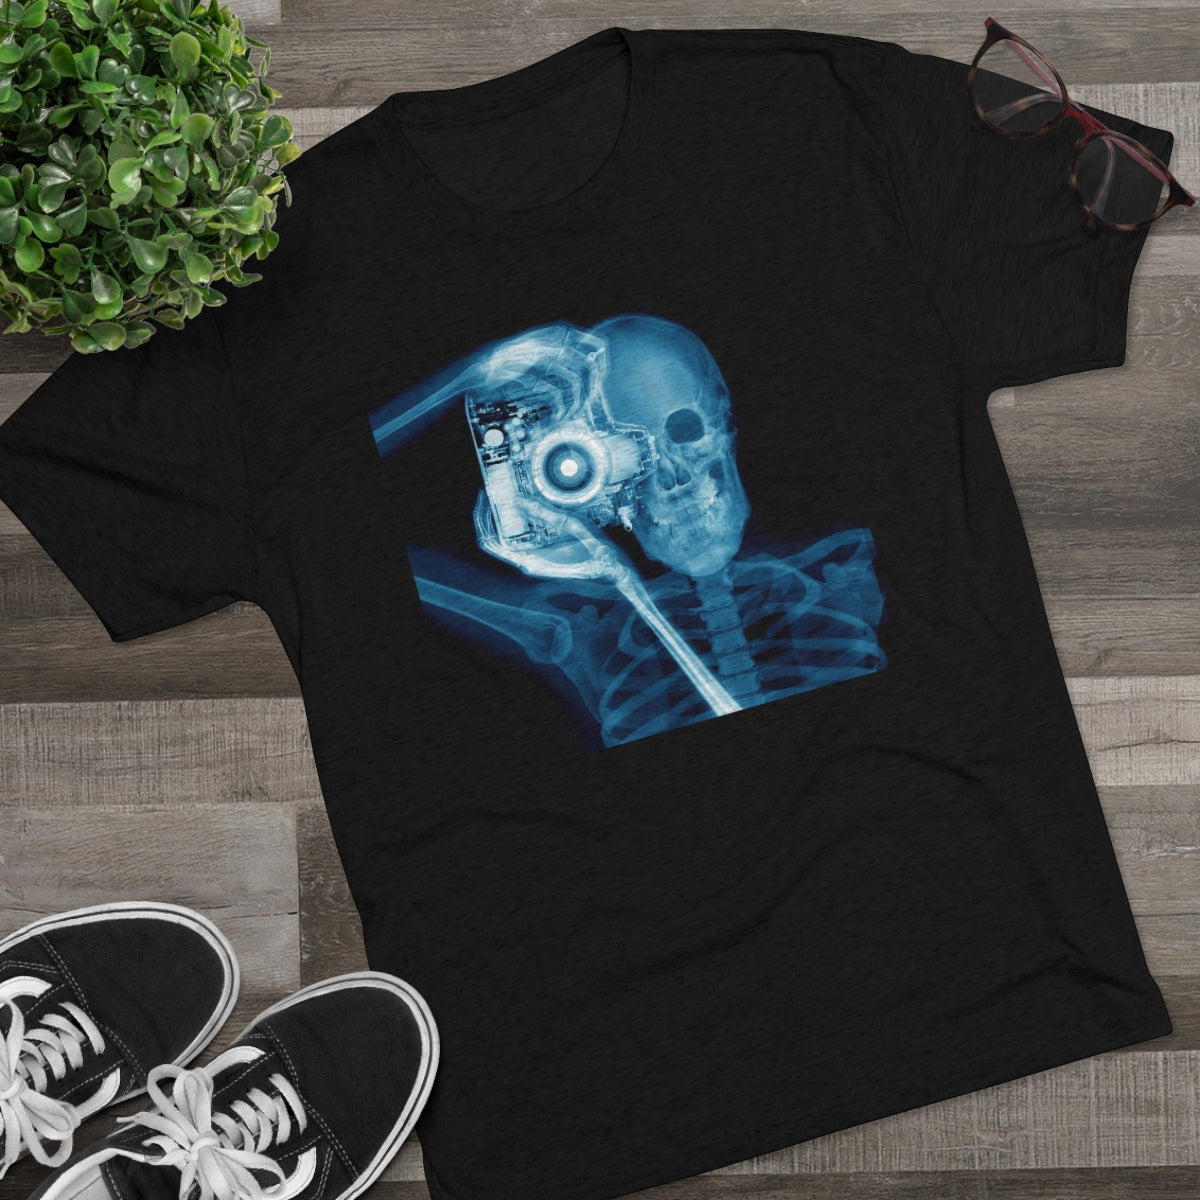 Special Collection – X-Ray: Paparazzi – Unisex Tri-Blend Crew Tee